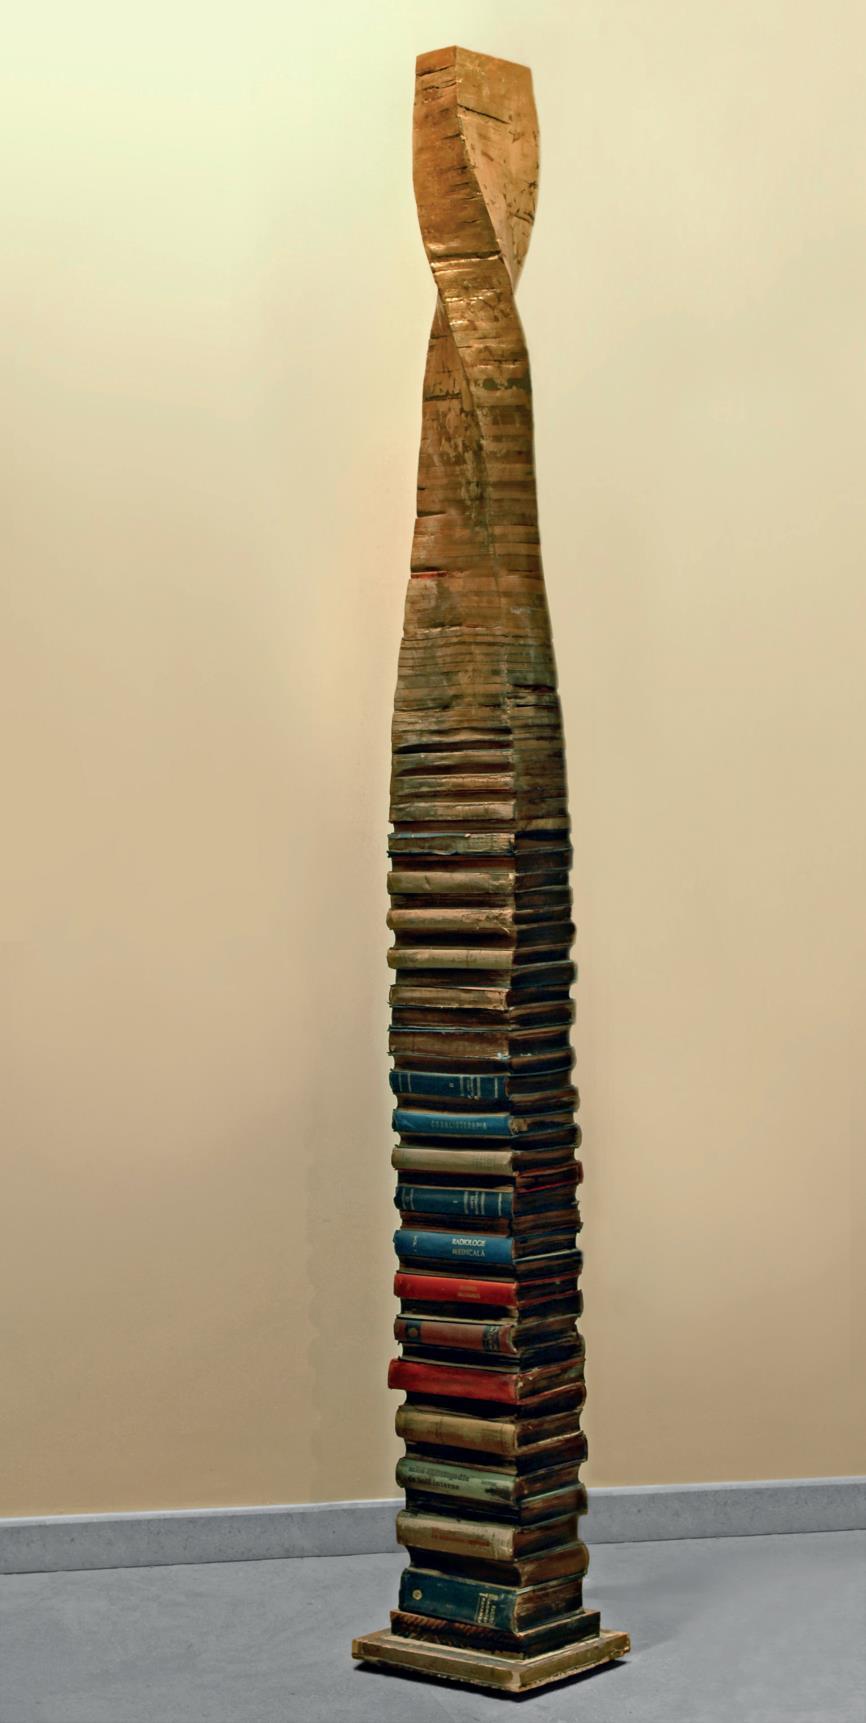 The sculptures, belonging to the vertical libraries series, are stacks of real books. They emerge from the reality of the materiality of the immediate and acquire a pure, spiritual dimension.